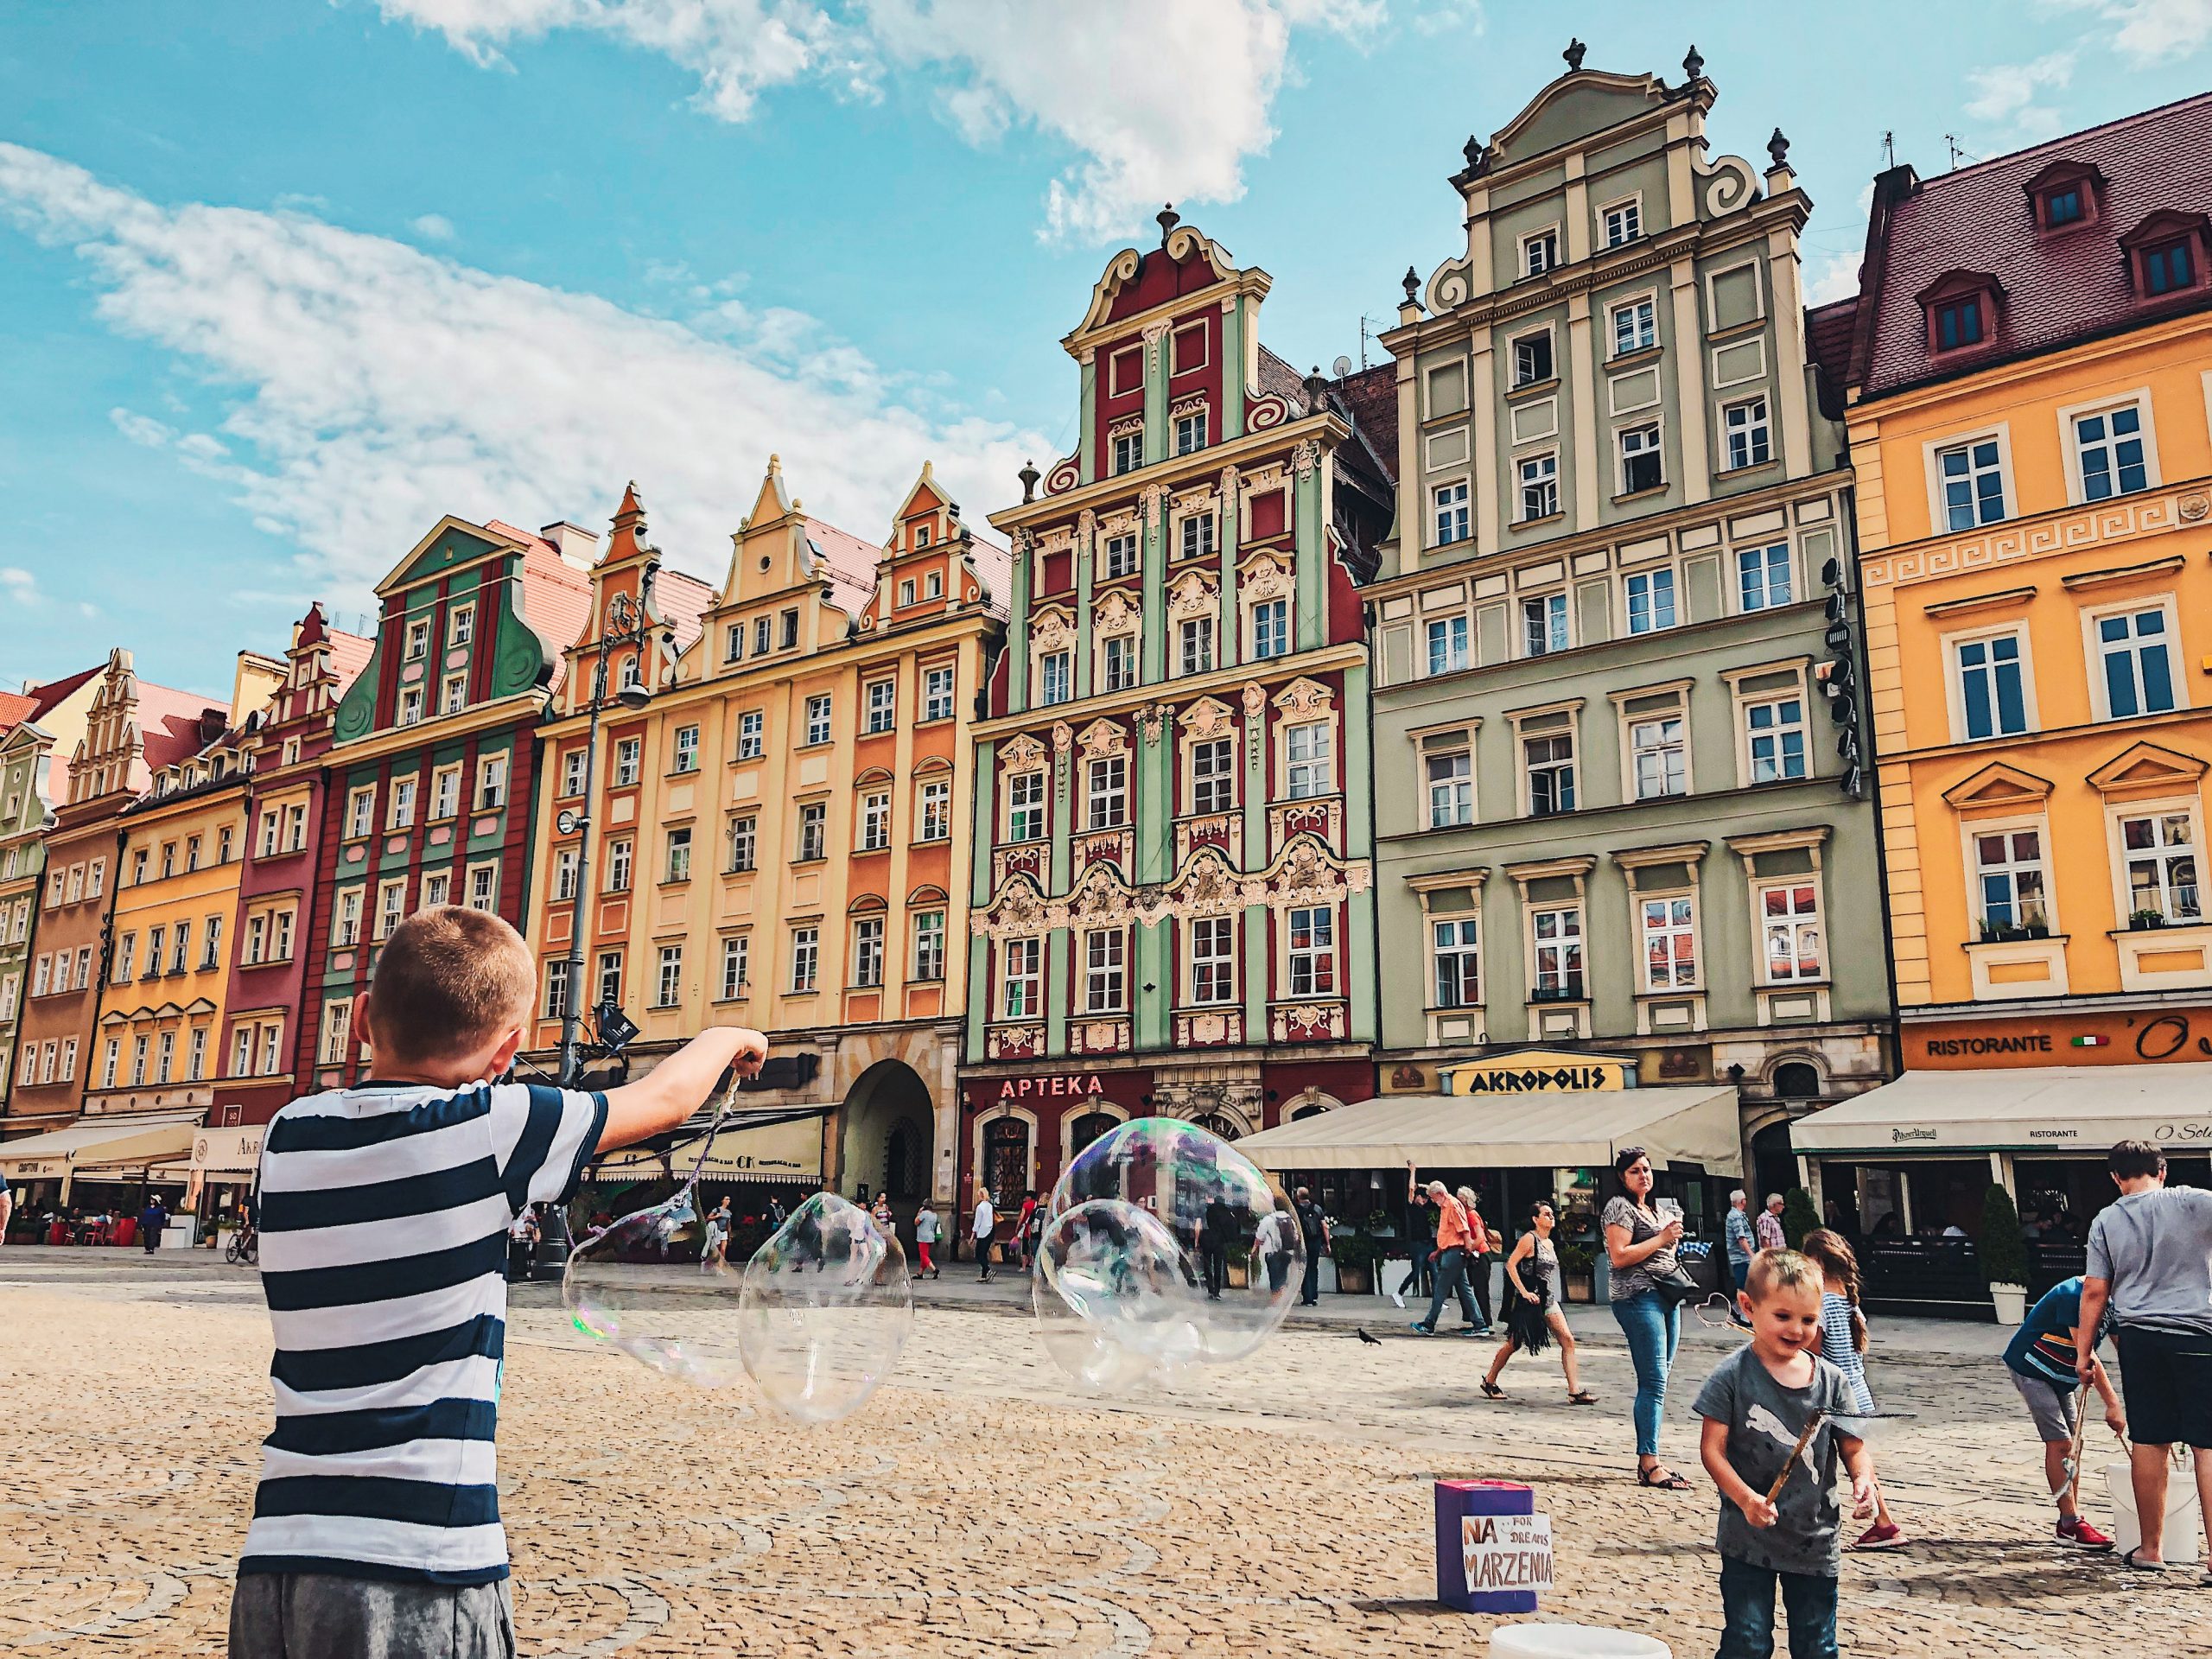 A boy is playing with soap bubbles in front of buildings in Wroclaw Poland